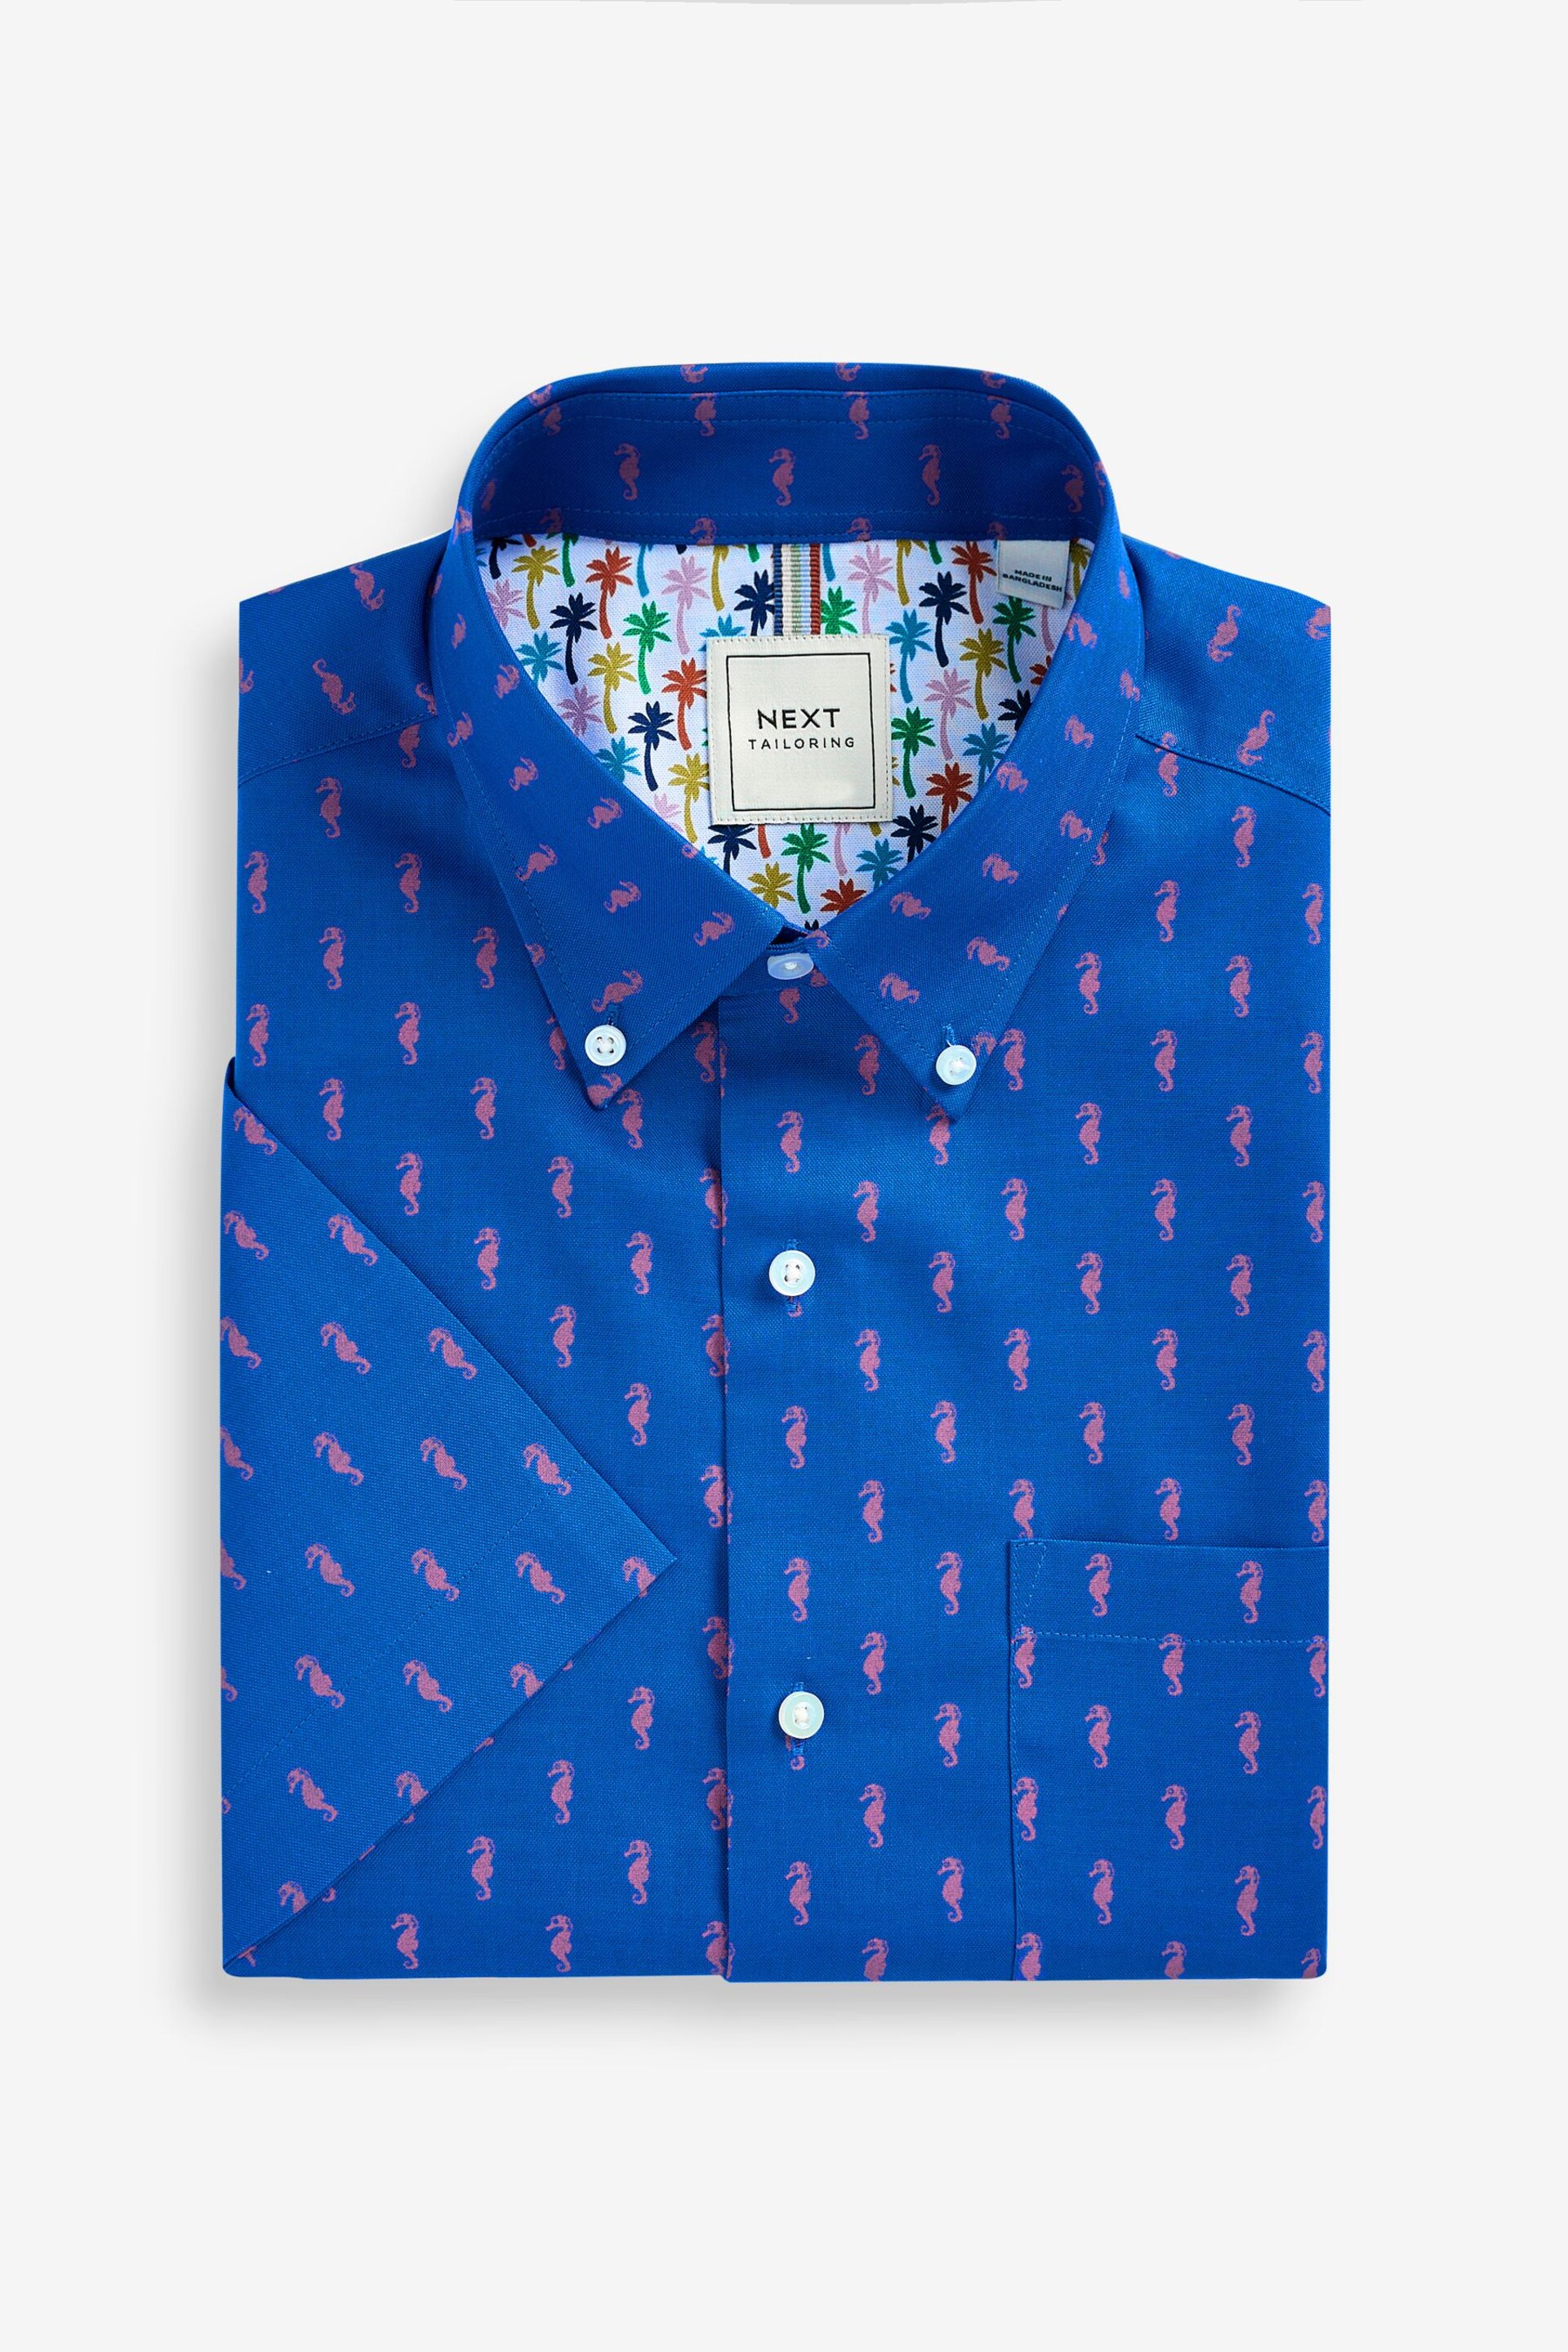 Blue/Pink Seahorse Easy Iron Button Down Short Sleeve Oxford Shirt - Image 7 of 9